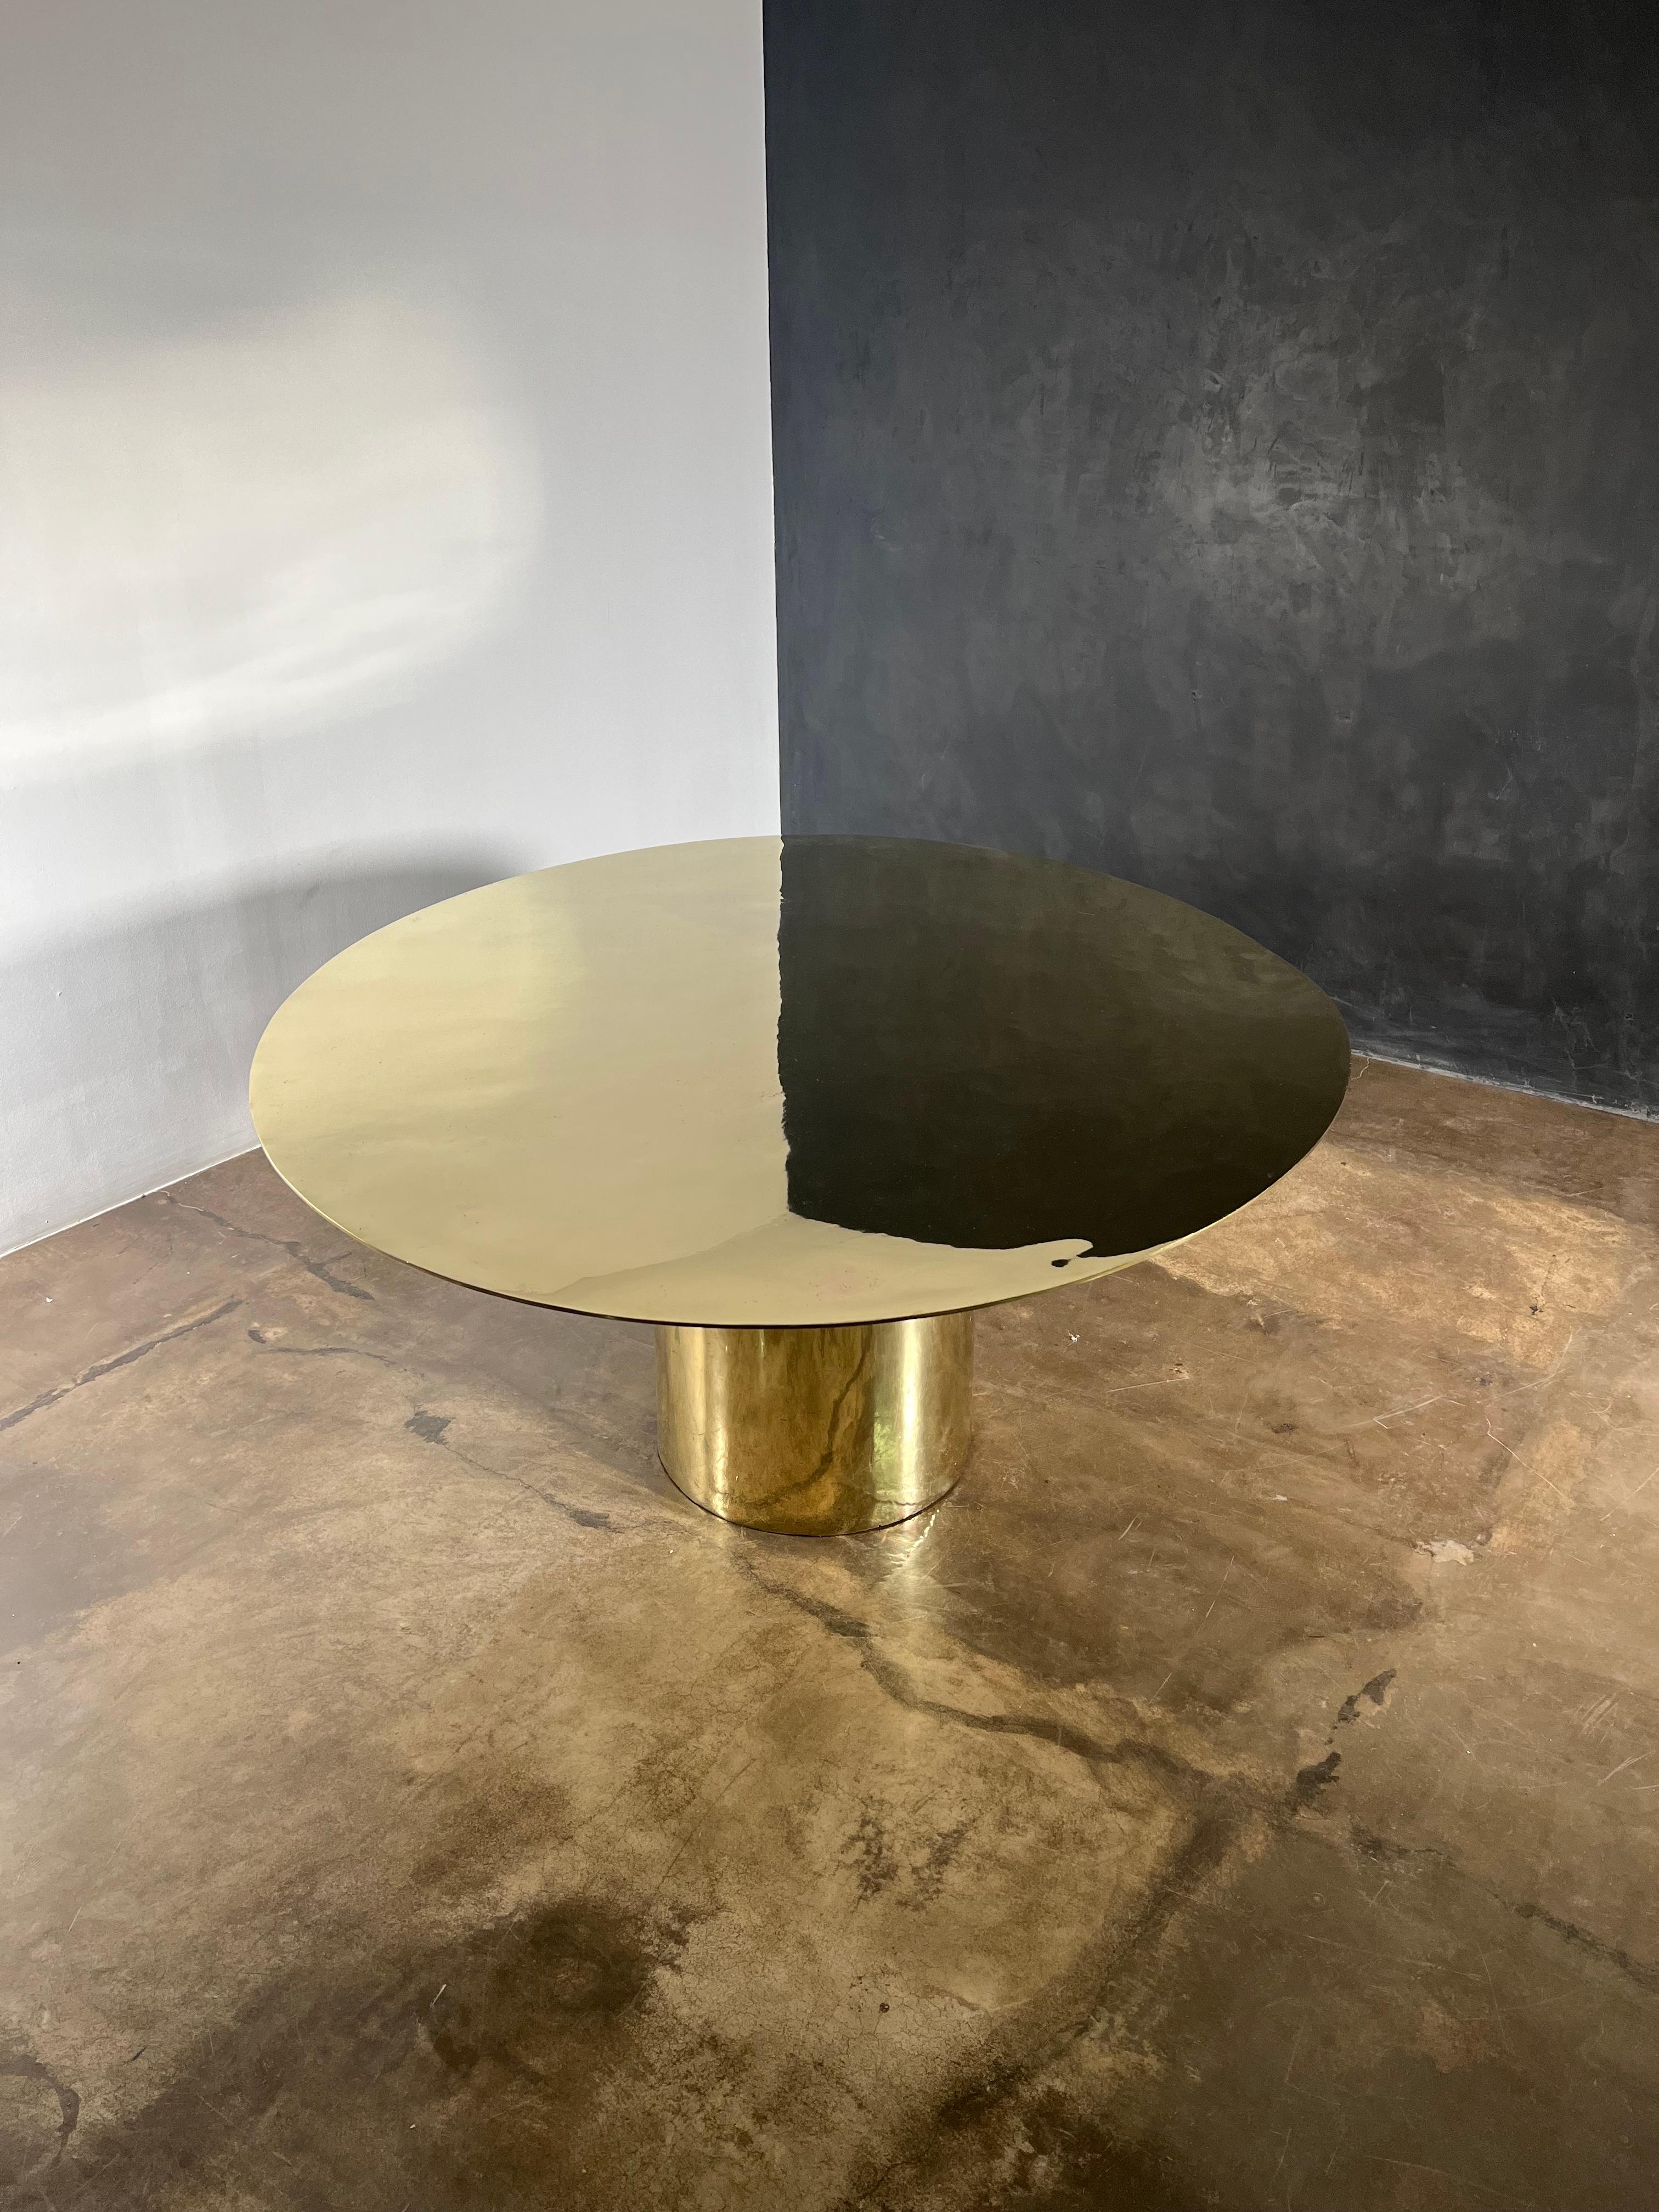 This cast bronze sculptural pedestal dining table from Costantini is truly a Functional Work of Art 

The top and base are cast separately and united with bronze screws so that the result is 100% bronze. Slight curves can be seen and felt in the